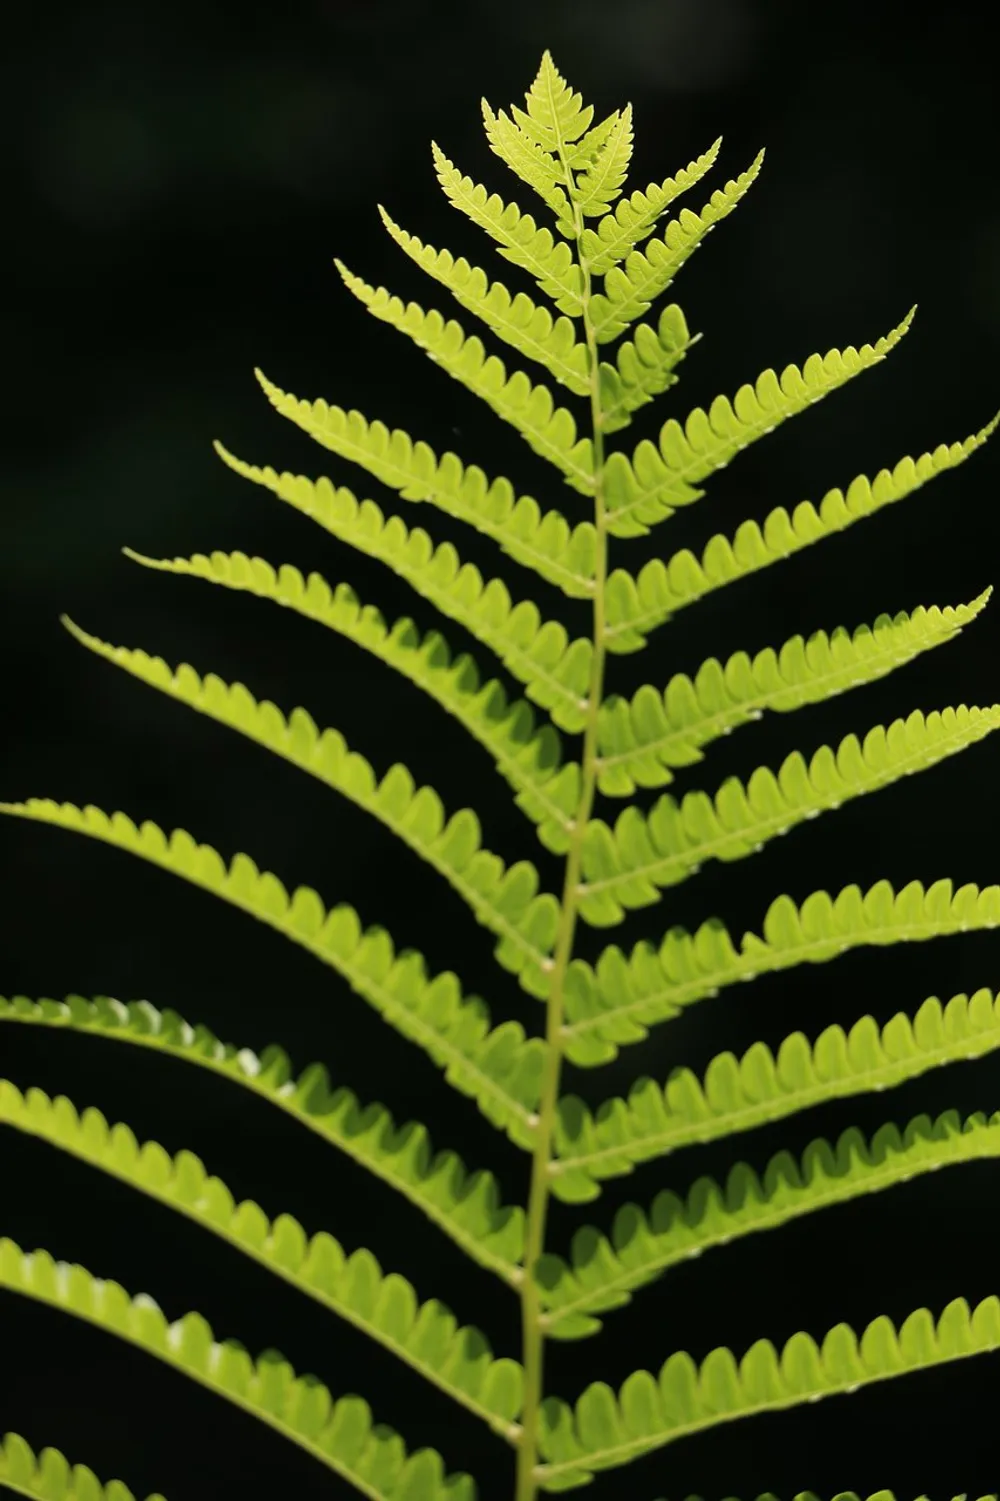 This image captures the vibrant intricate leaf structure of a green fern against a dark blurred background